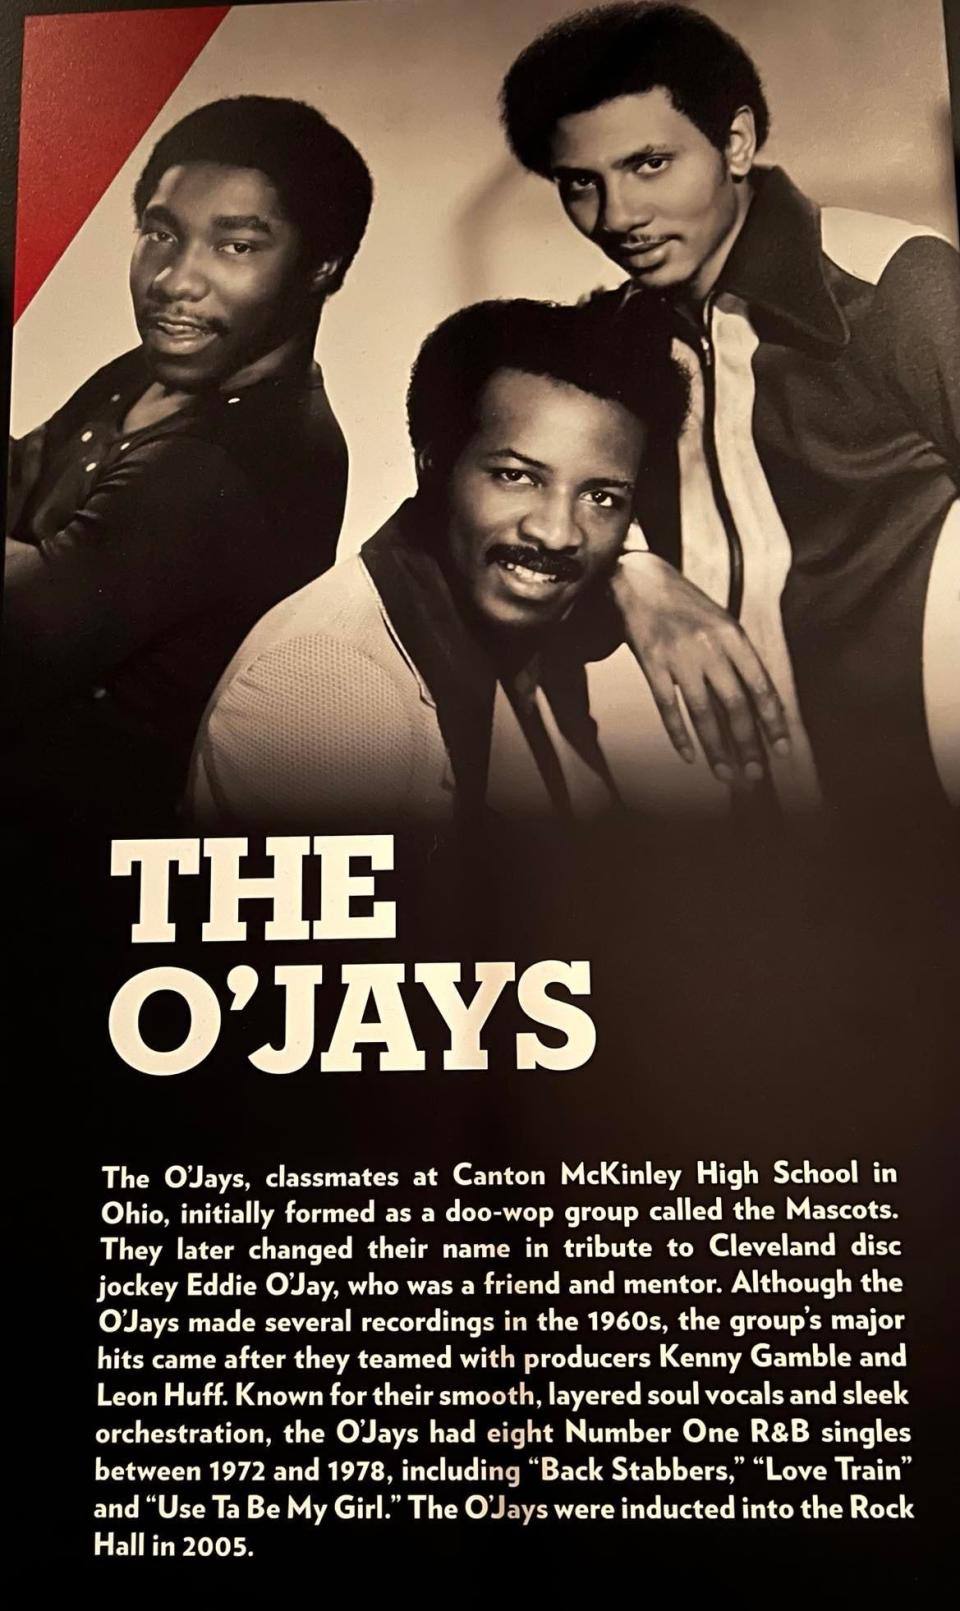 A display at the Rock & Roll Hall of Fame in Cleveland tells of how The O'Jays began as singers in Canton. The group gained popularity nationally in the 1970s, and was inducted into the rock hall in 2005.